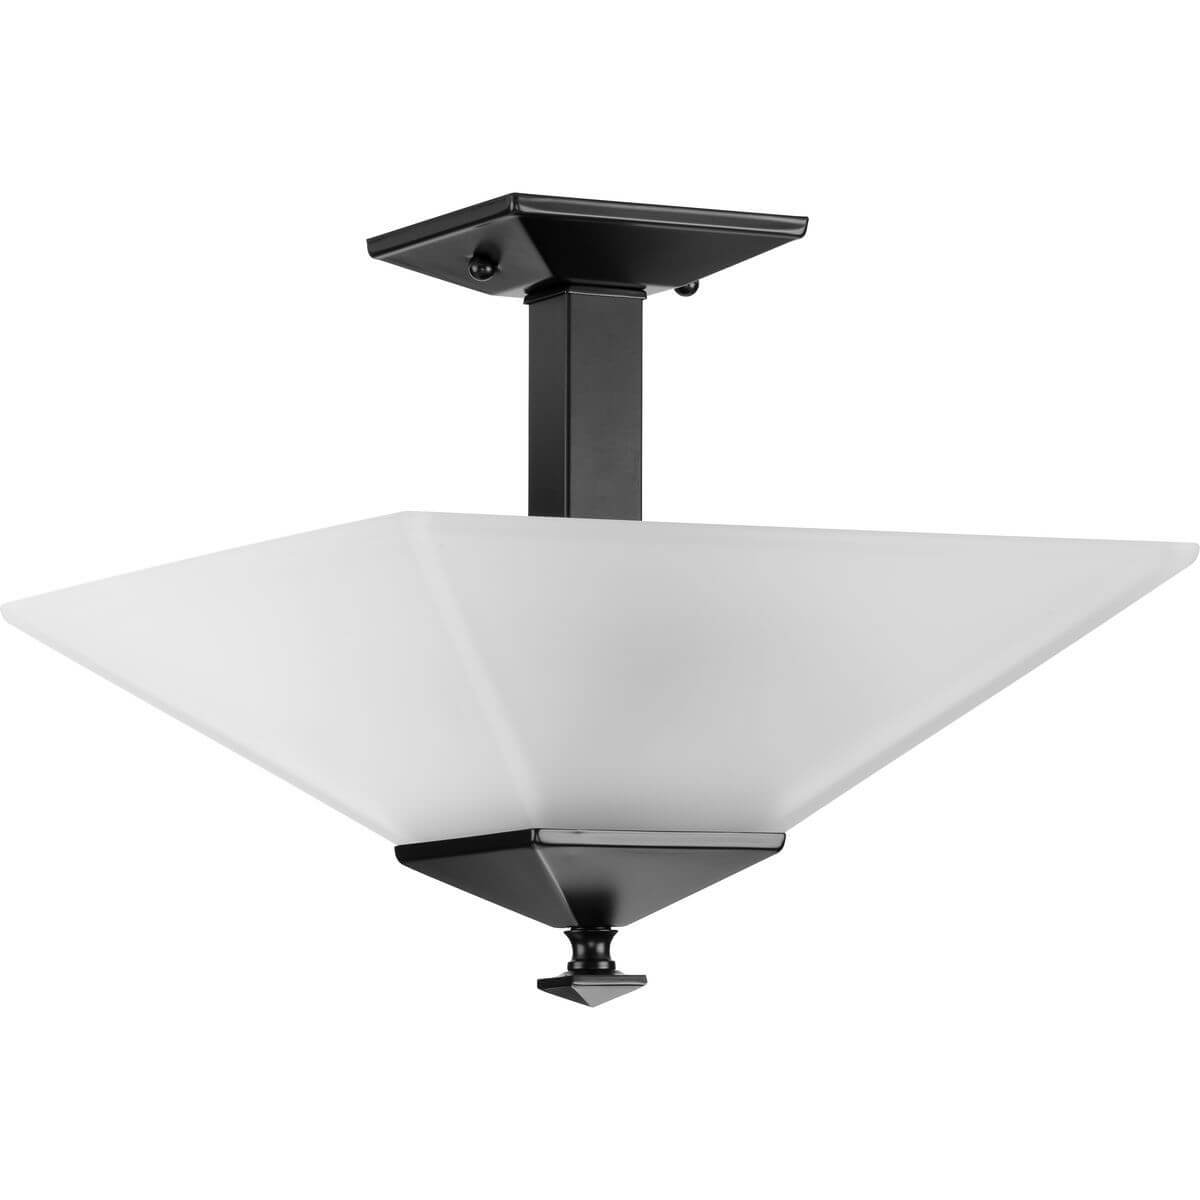 Progress Lighting Clifton Heights 2 Light 13 inch Semi-Flush Mount in Matte Black with Etched Glass P350107-31M